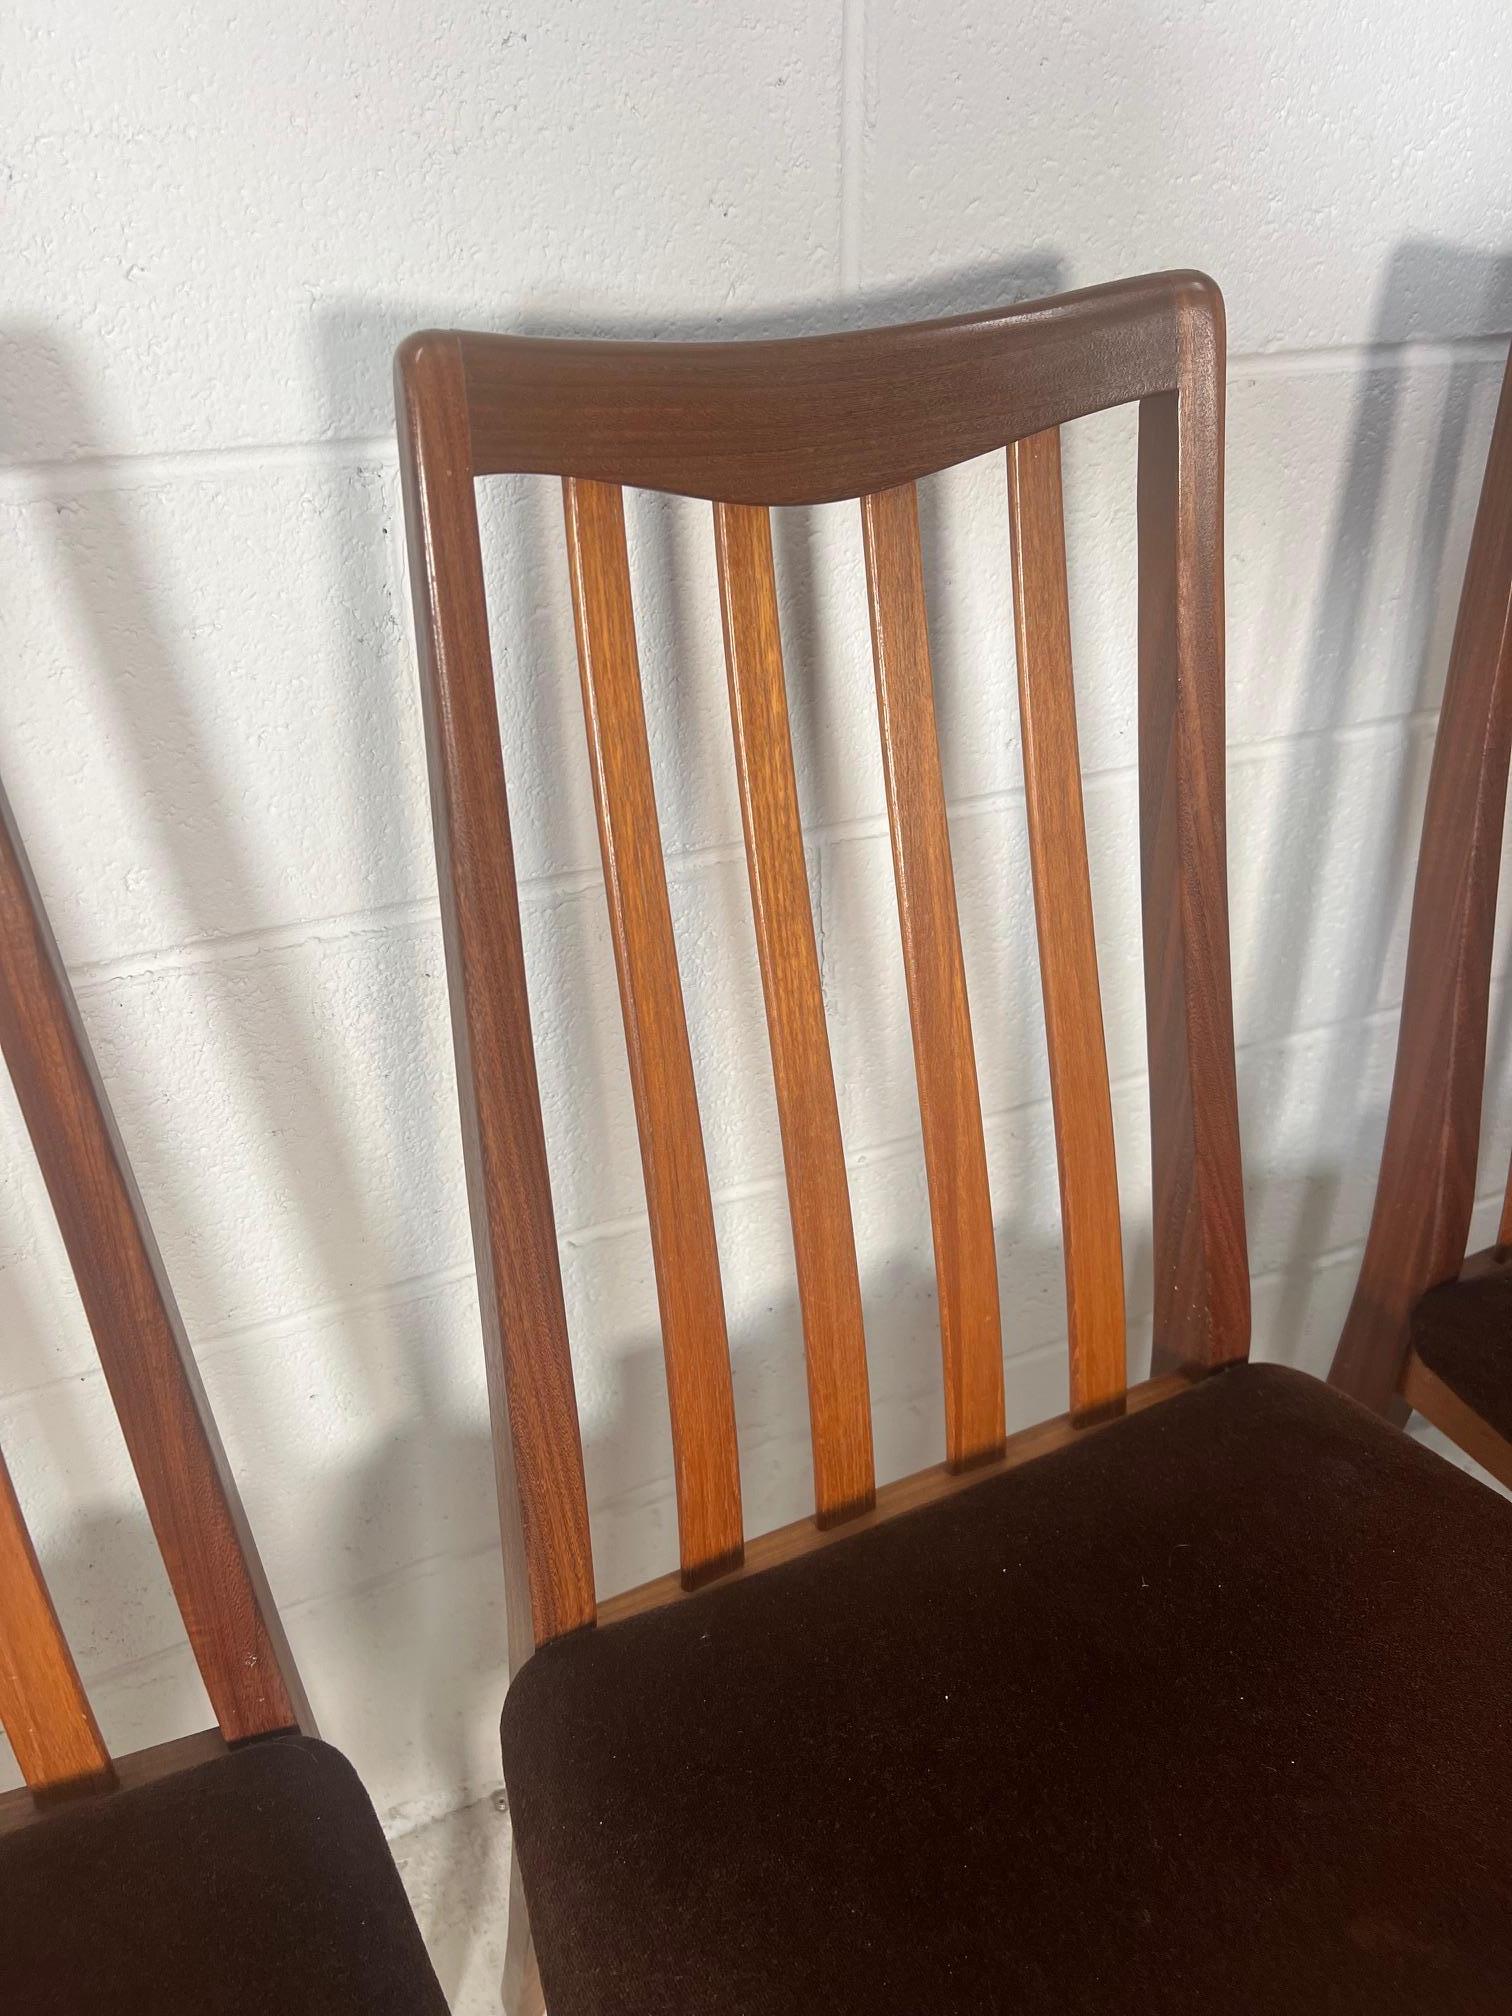 Set of 4 mid century modern teak dining chairs by G Plan. Slat back.

Very good condition. Some marks here and there but very nice overall. Could easily be recovered if desired to match your decor.

Dimensions: W x D x H

19